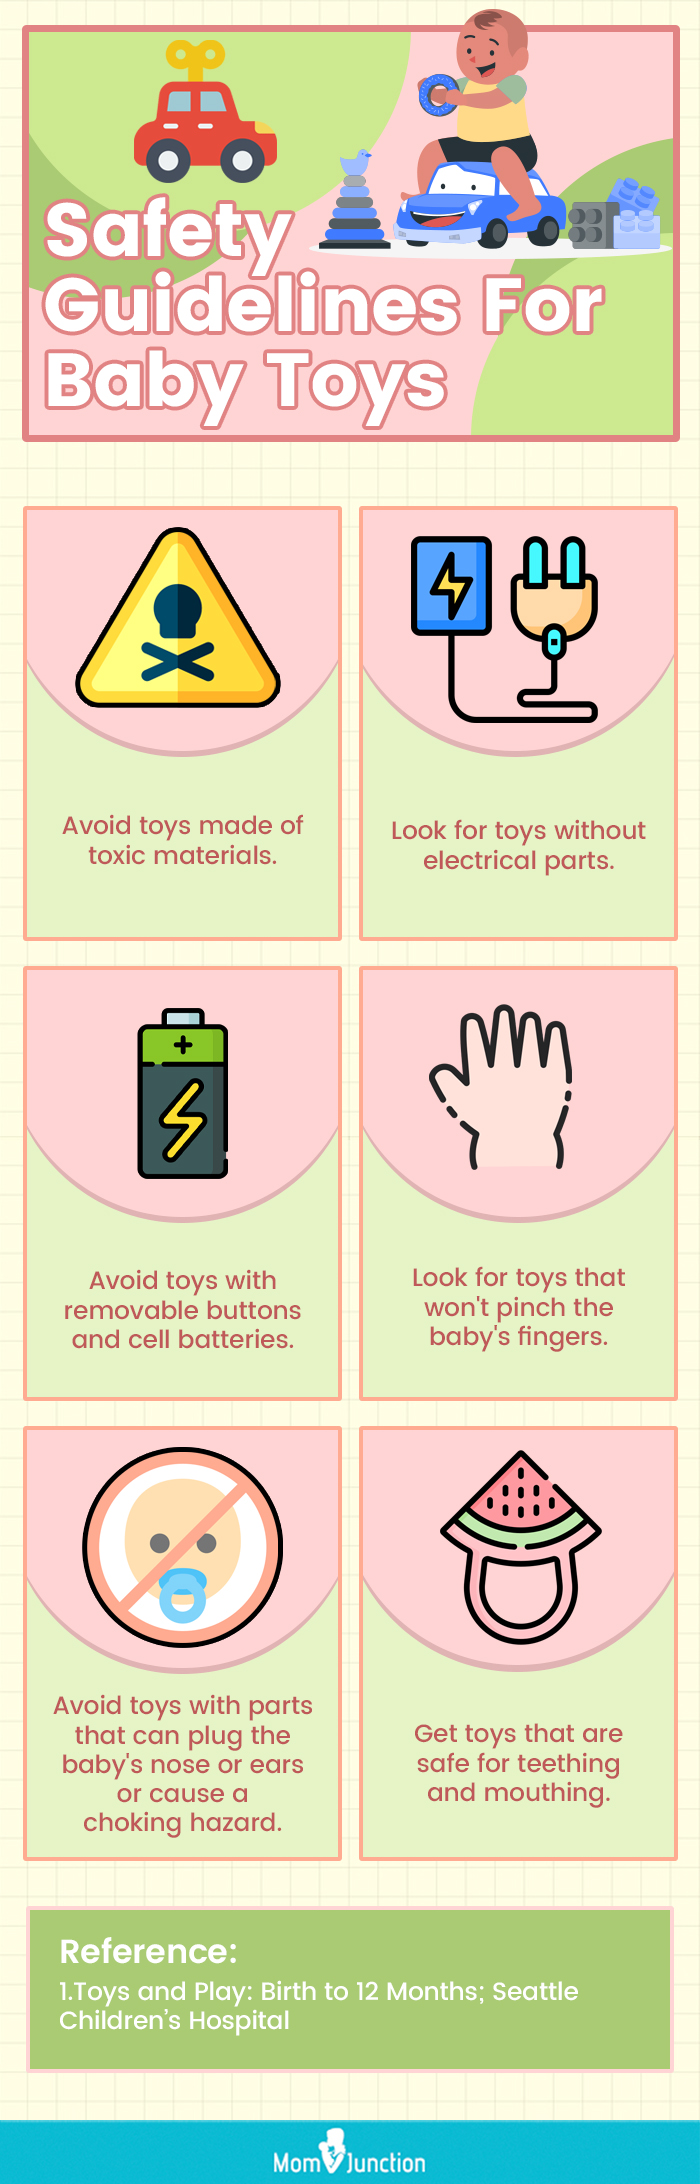 Safety Guidelines For Baby Toys